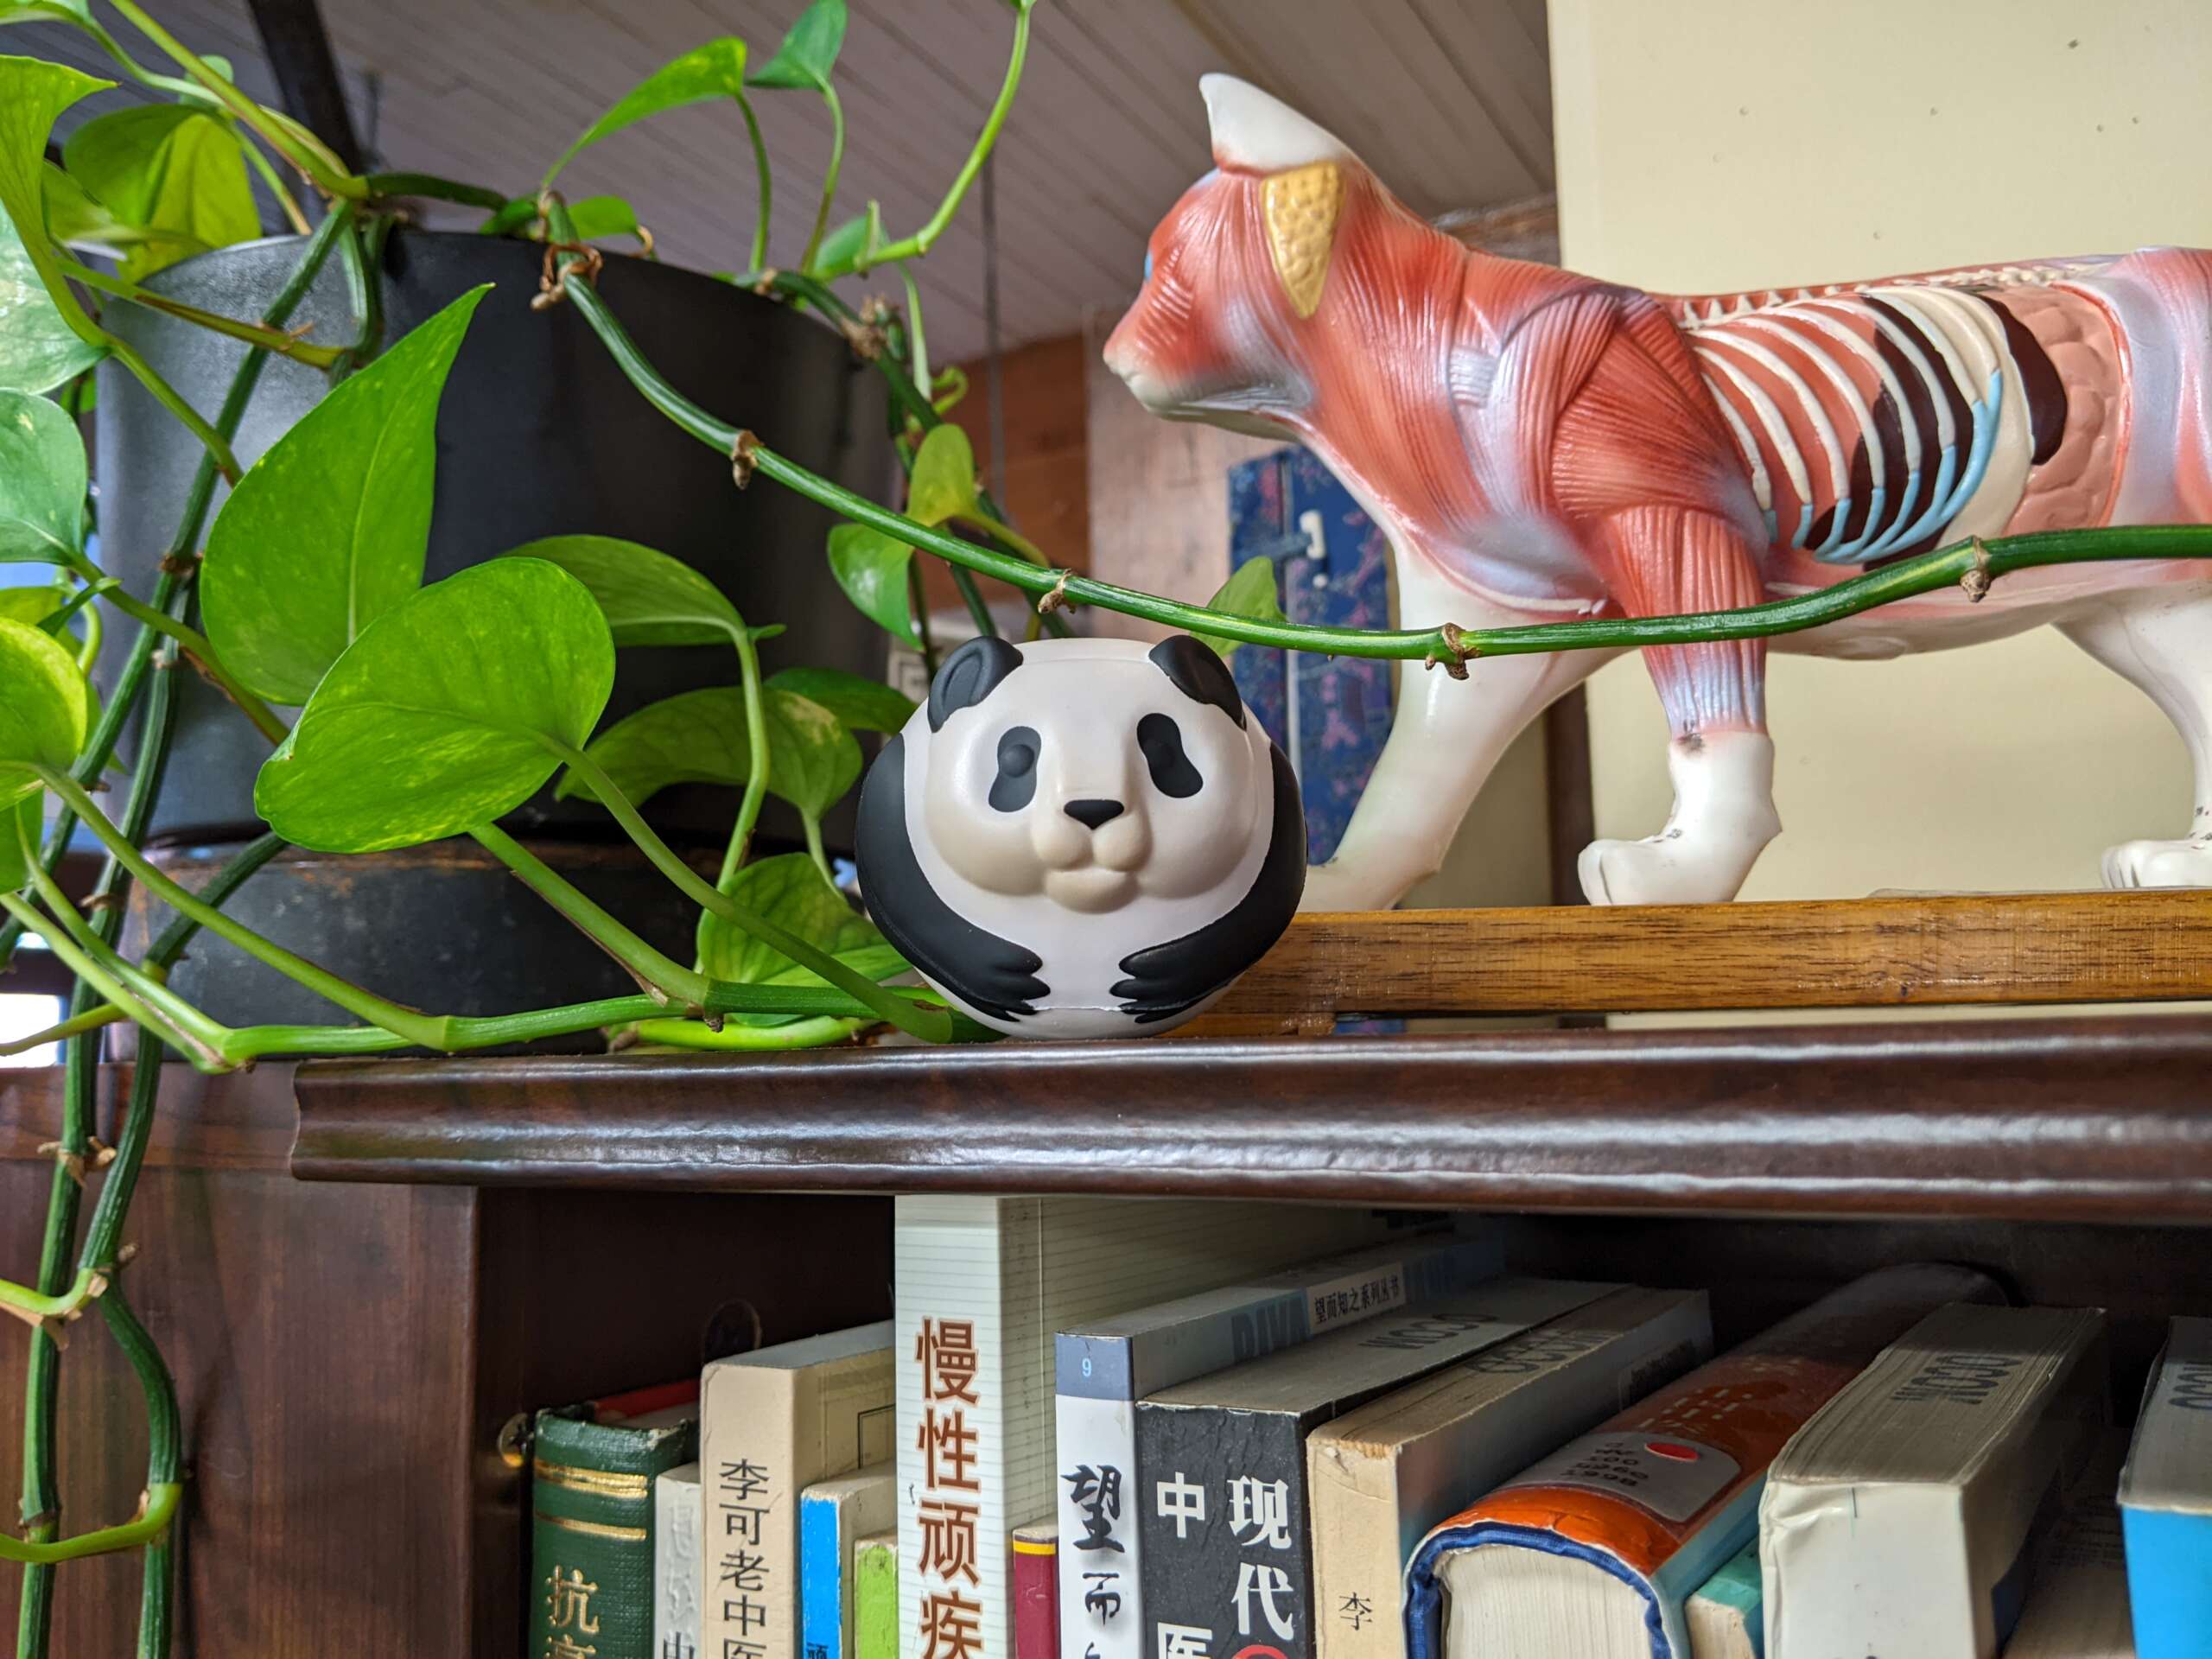 Panda toy and cat acupuncture model